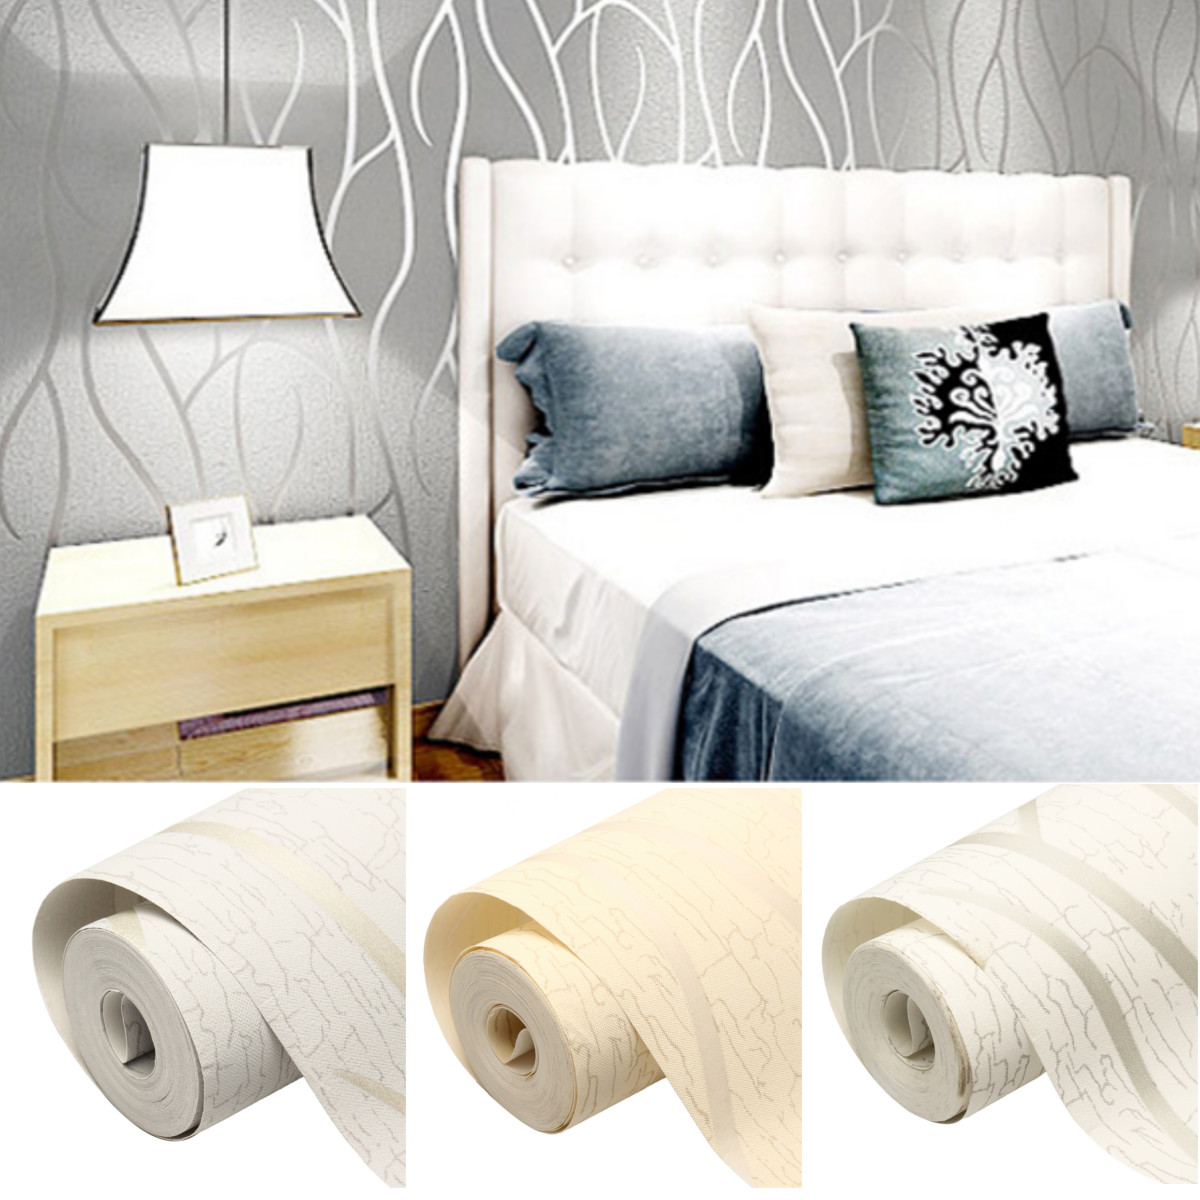 10M-3D-Non-woven-Wave-Stripe-Embossed-paper-Rolls-Bedroom-Living-Room-Wall-Sticker-1604540-1